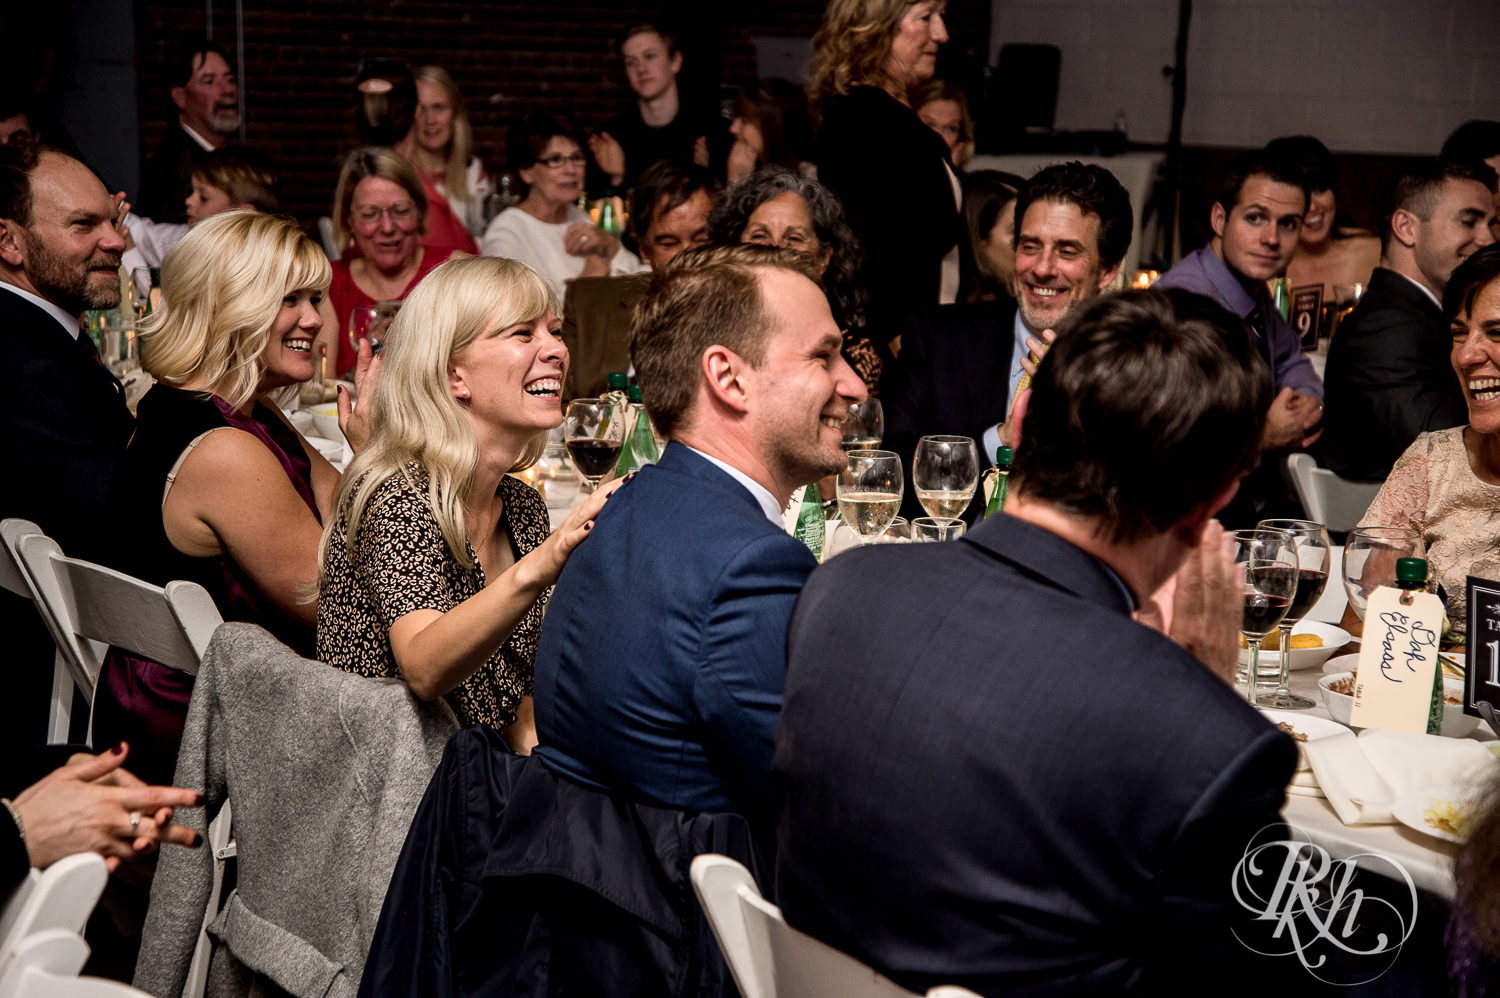 Guests laugh during wedding reception speeches at Paikka in Saint Paul, Minnesota.